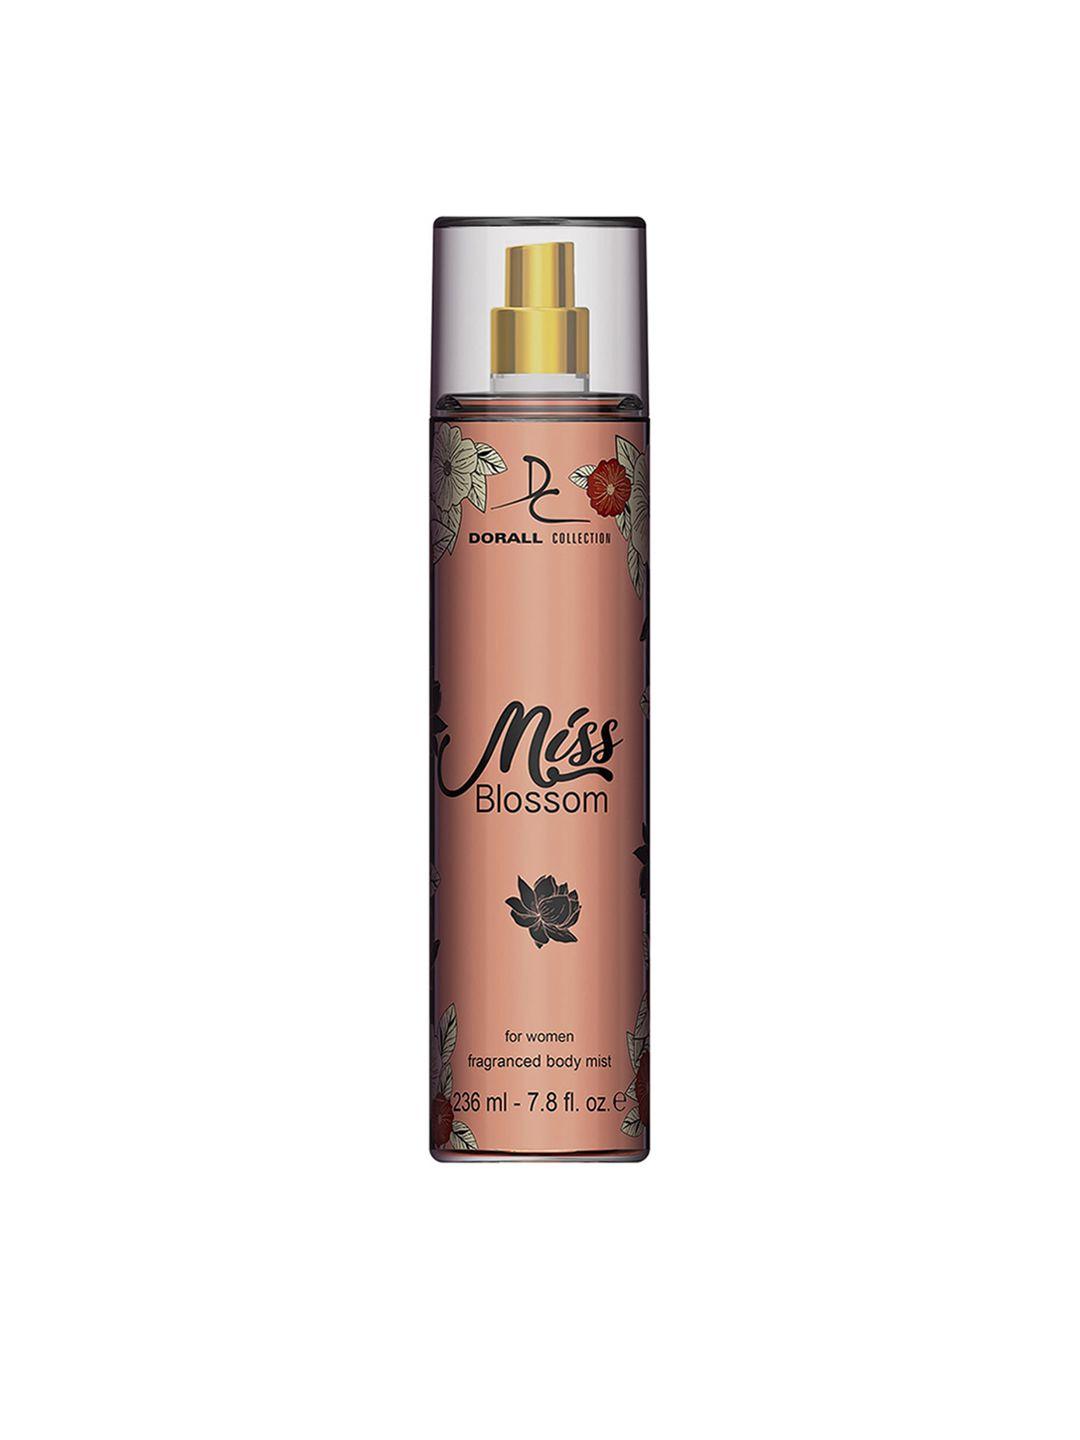 dorall collection women miss blossom fragrance body mist - 236ml